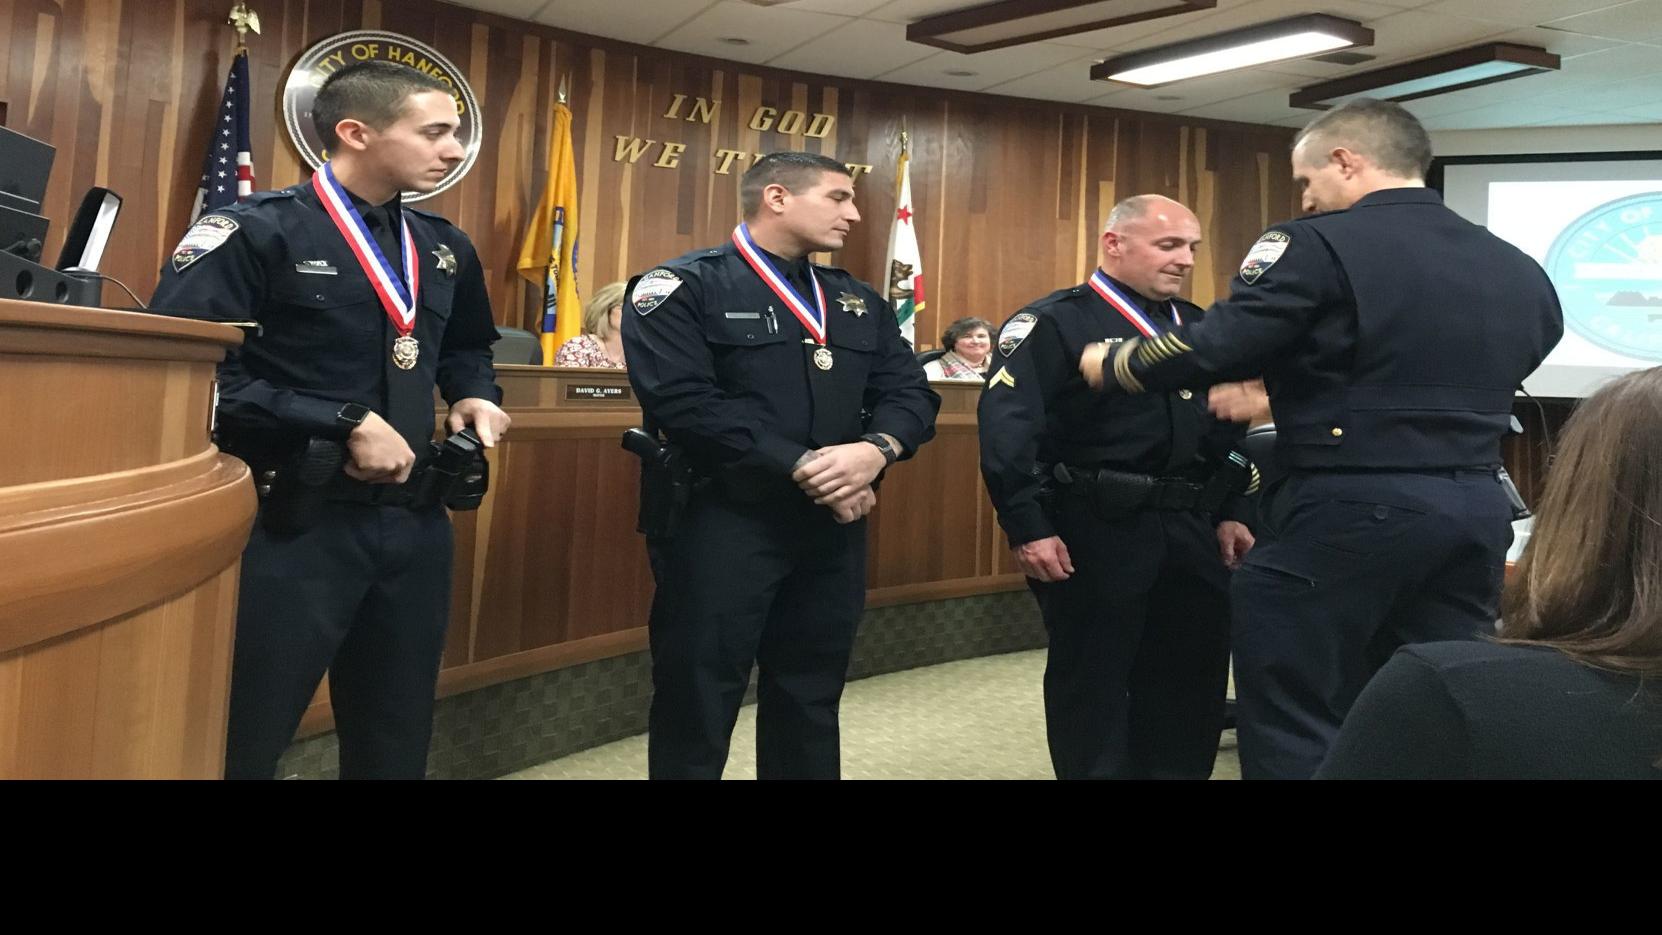 Police Badge Race Medals made for Fresno PD